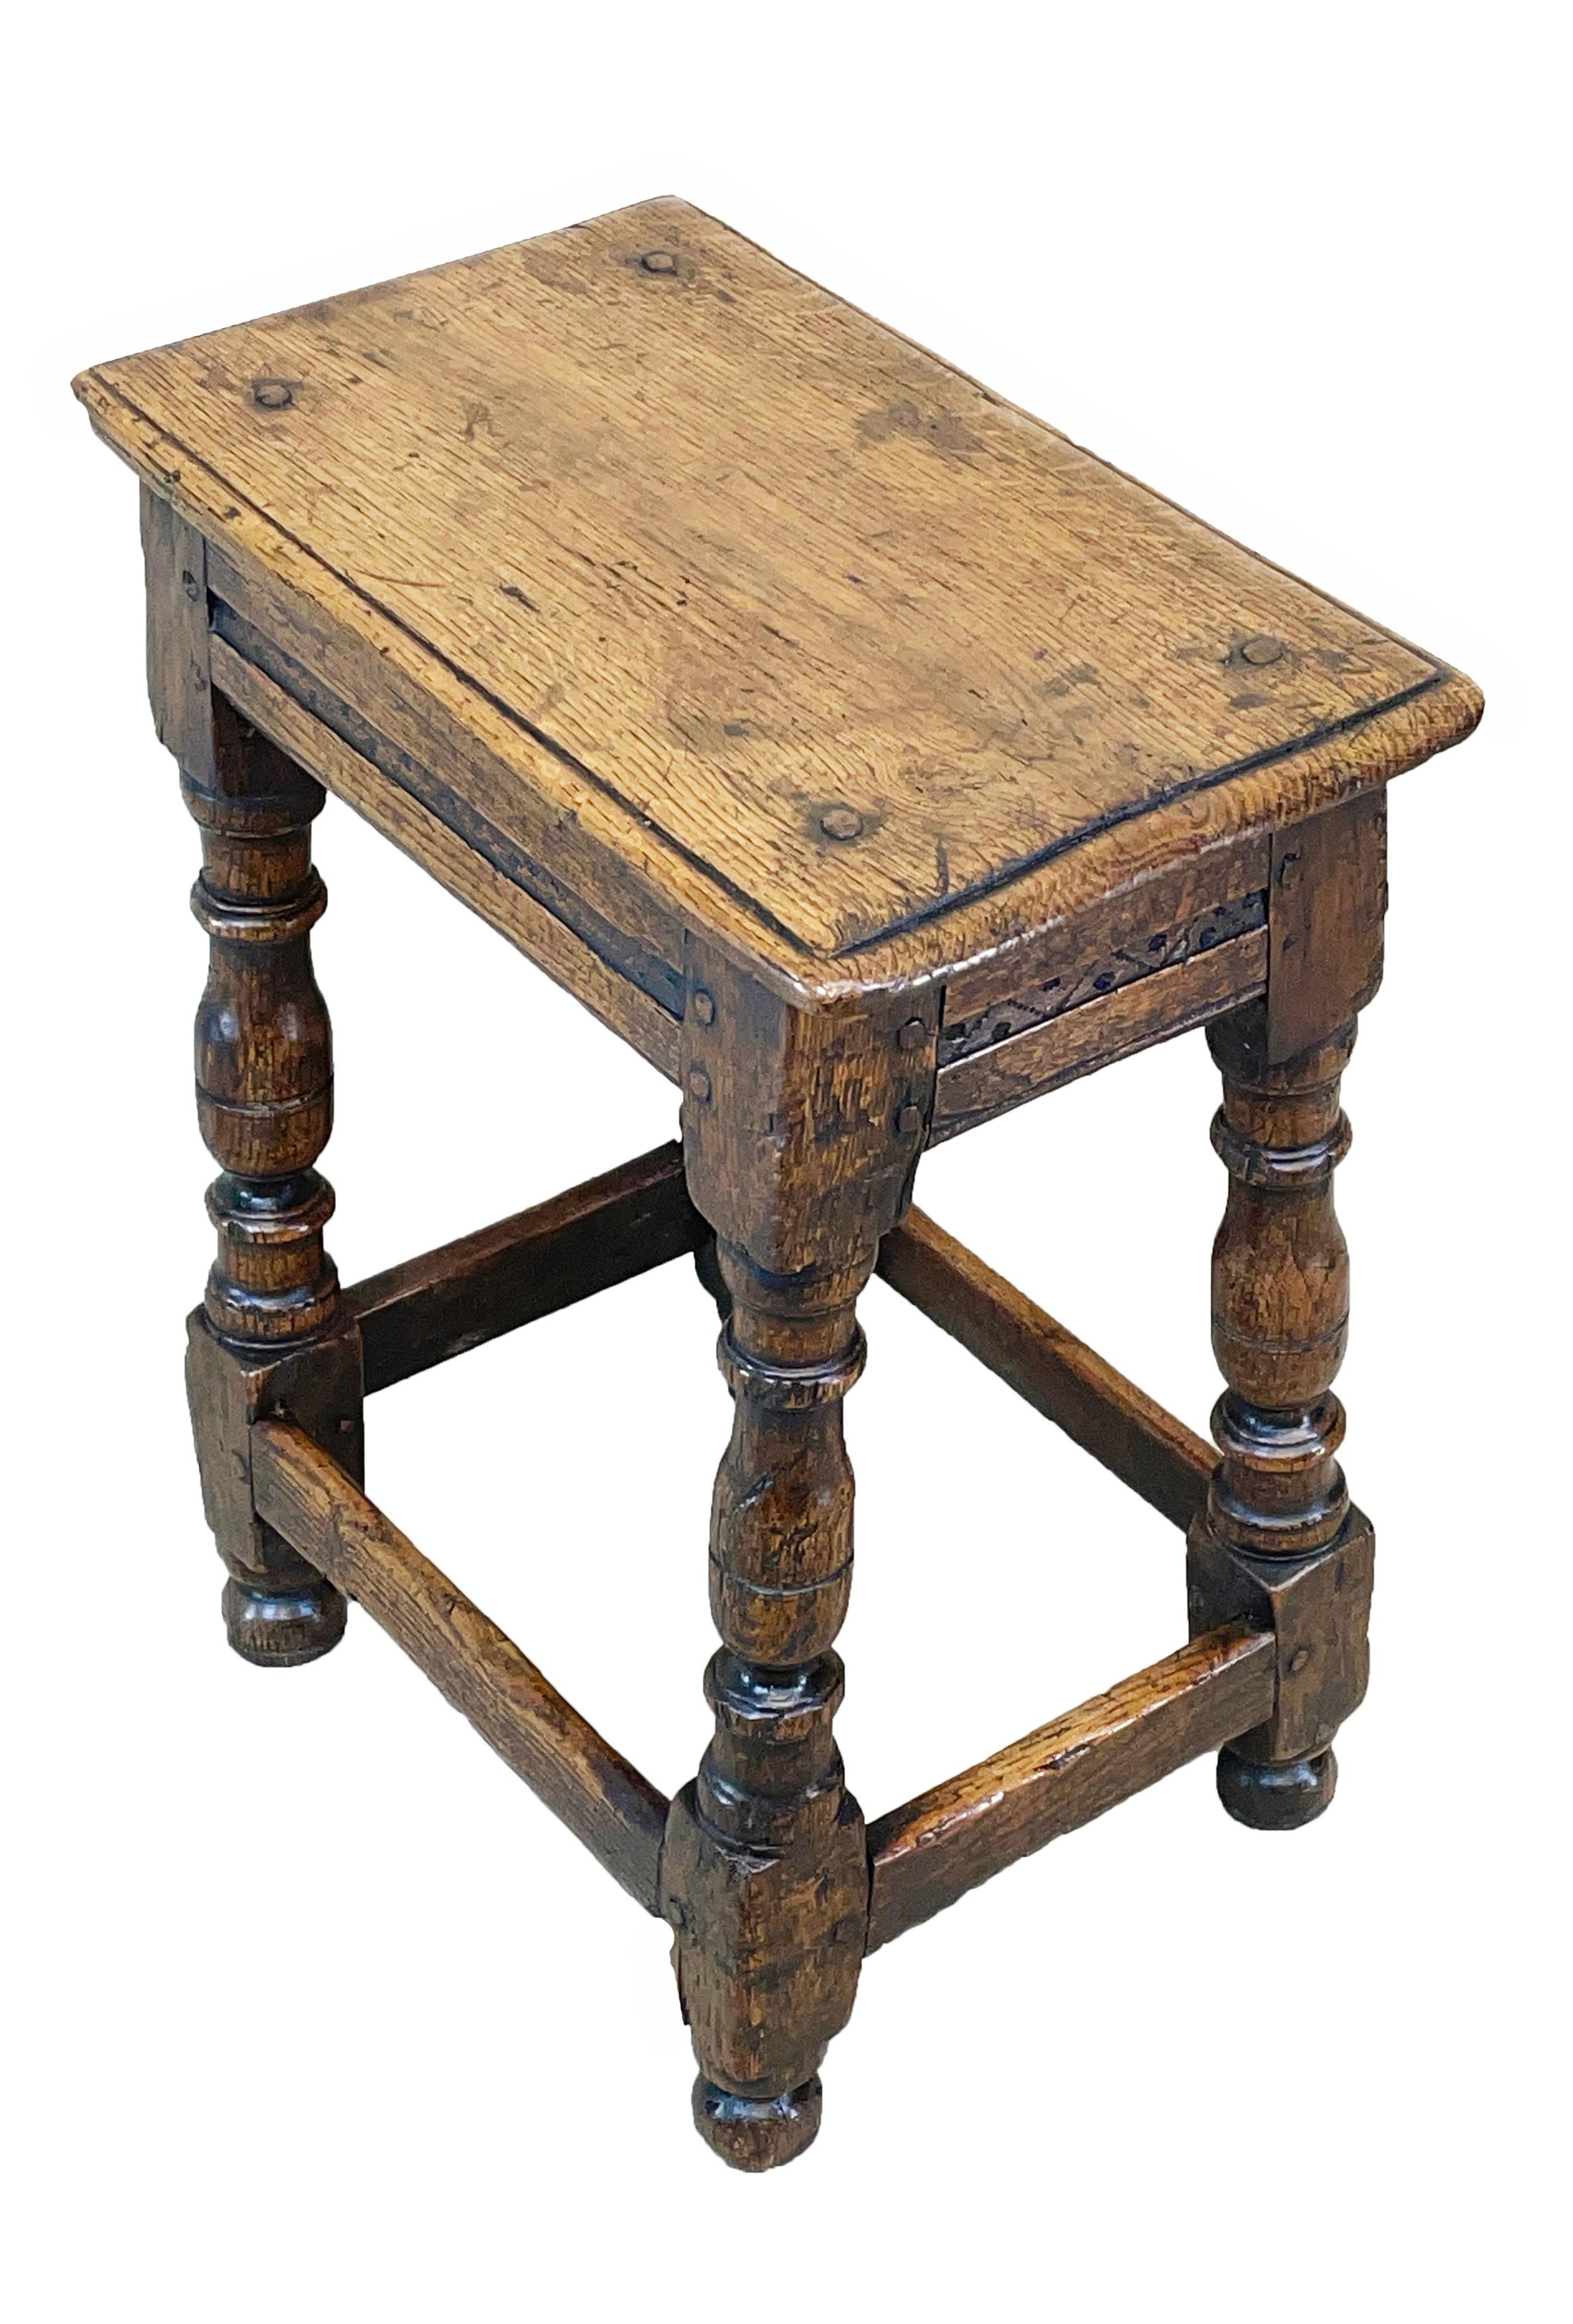 A charming 17th century Charles II period oak
Joint stool having single plank top over
Seat rails with attractive carved decoration
Raised on elegant baluster turned leg
Supports with plain stretchers retaining
Exceptional color and patina